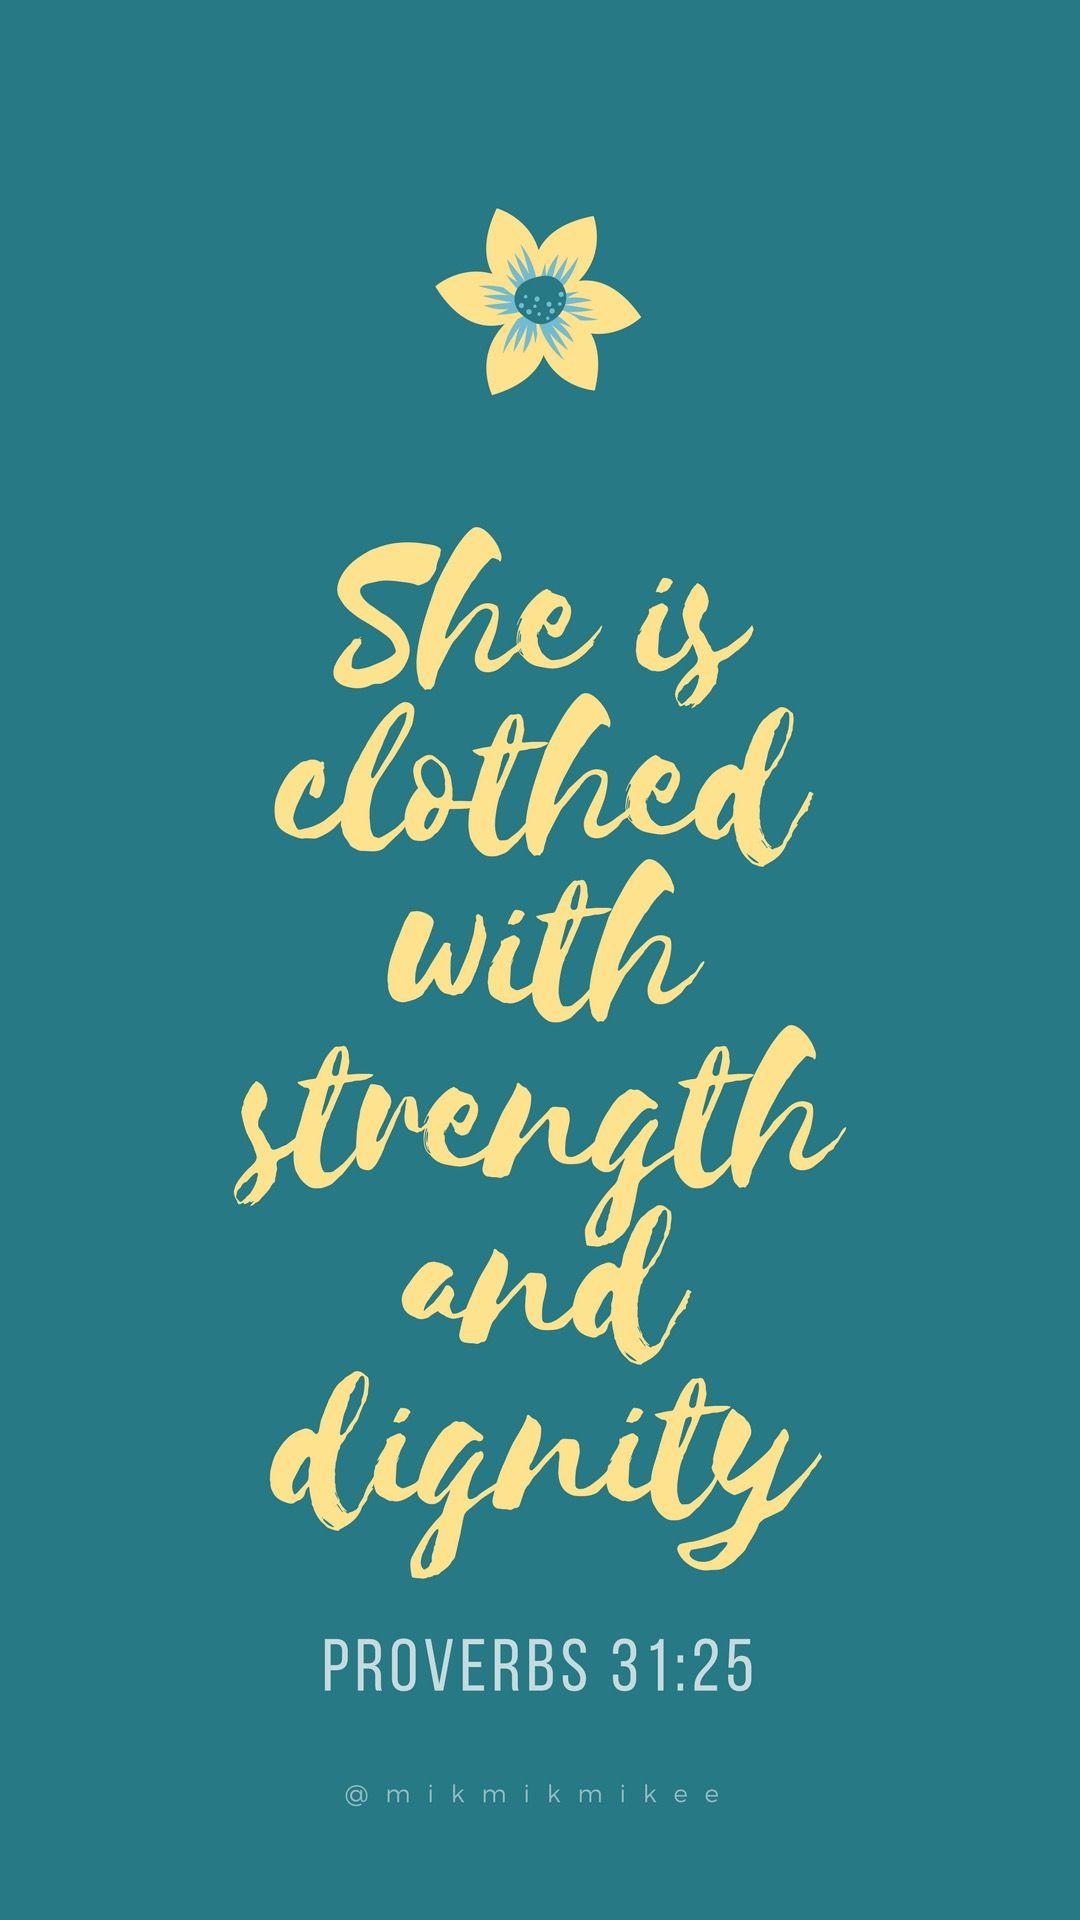 She is clothed with strength and dignity. Proverbs 31:25 Teal